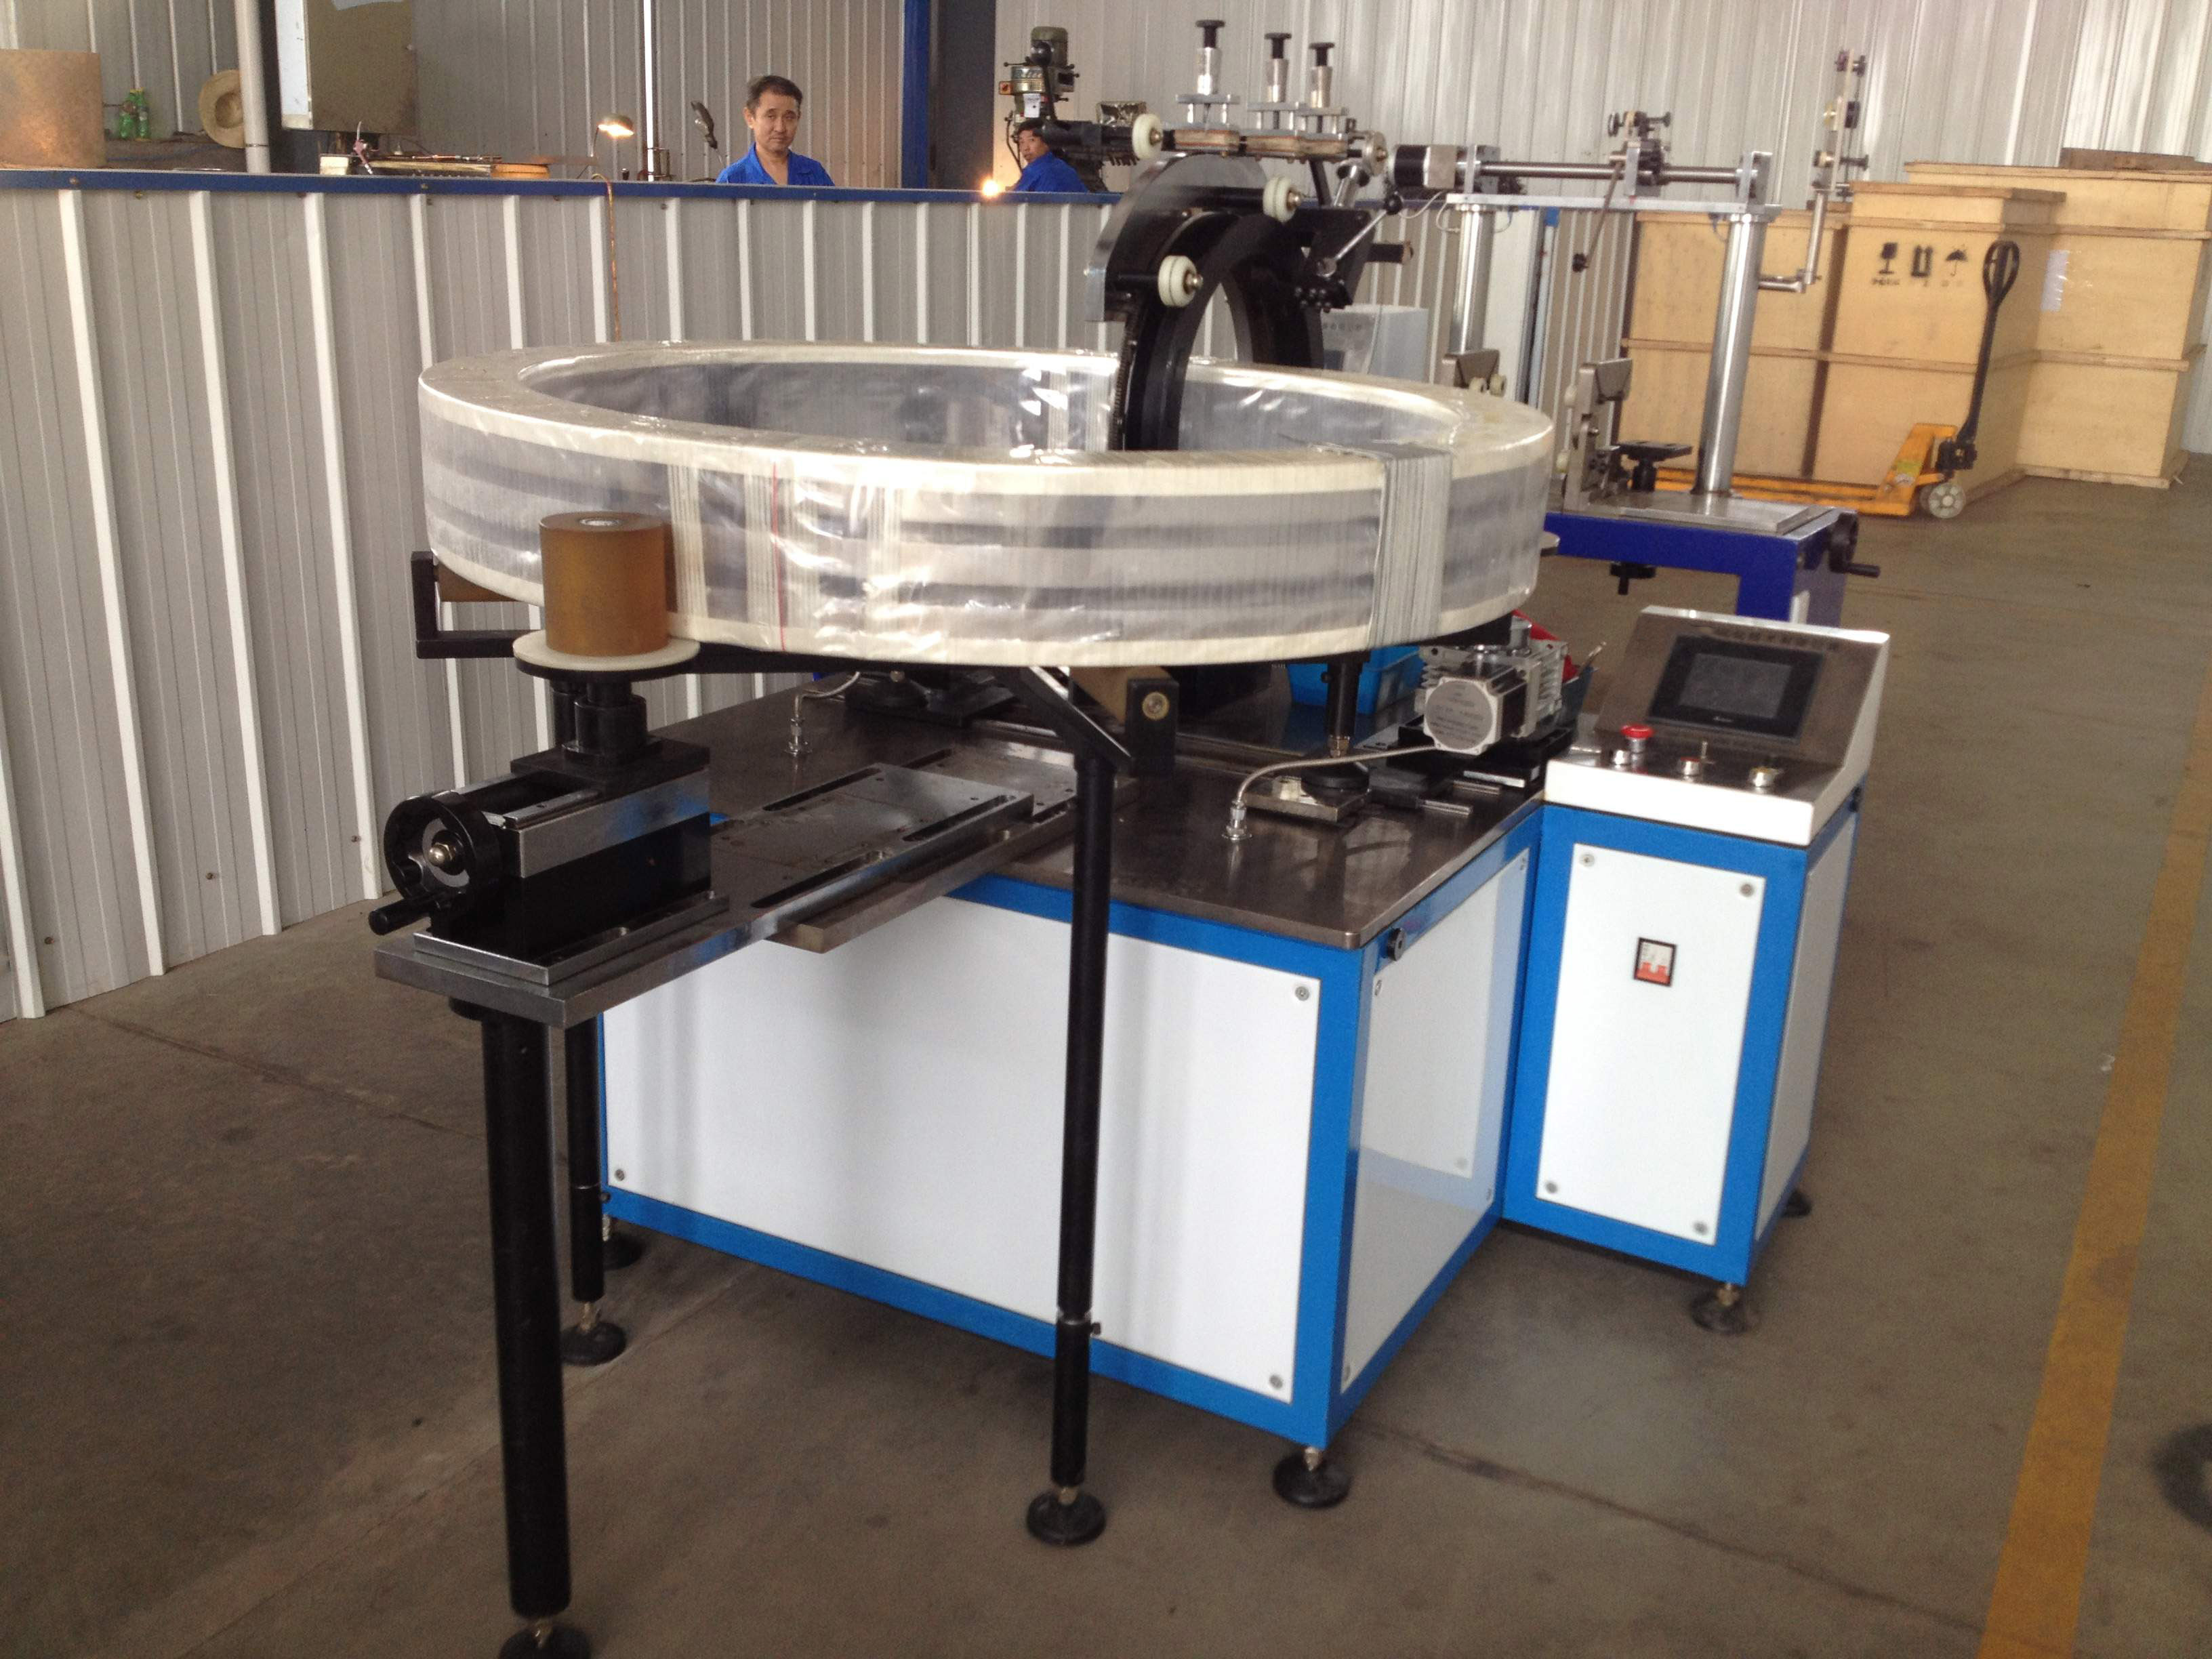  Coil winding machine for potential transformer Manufactures